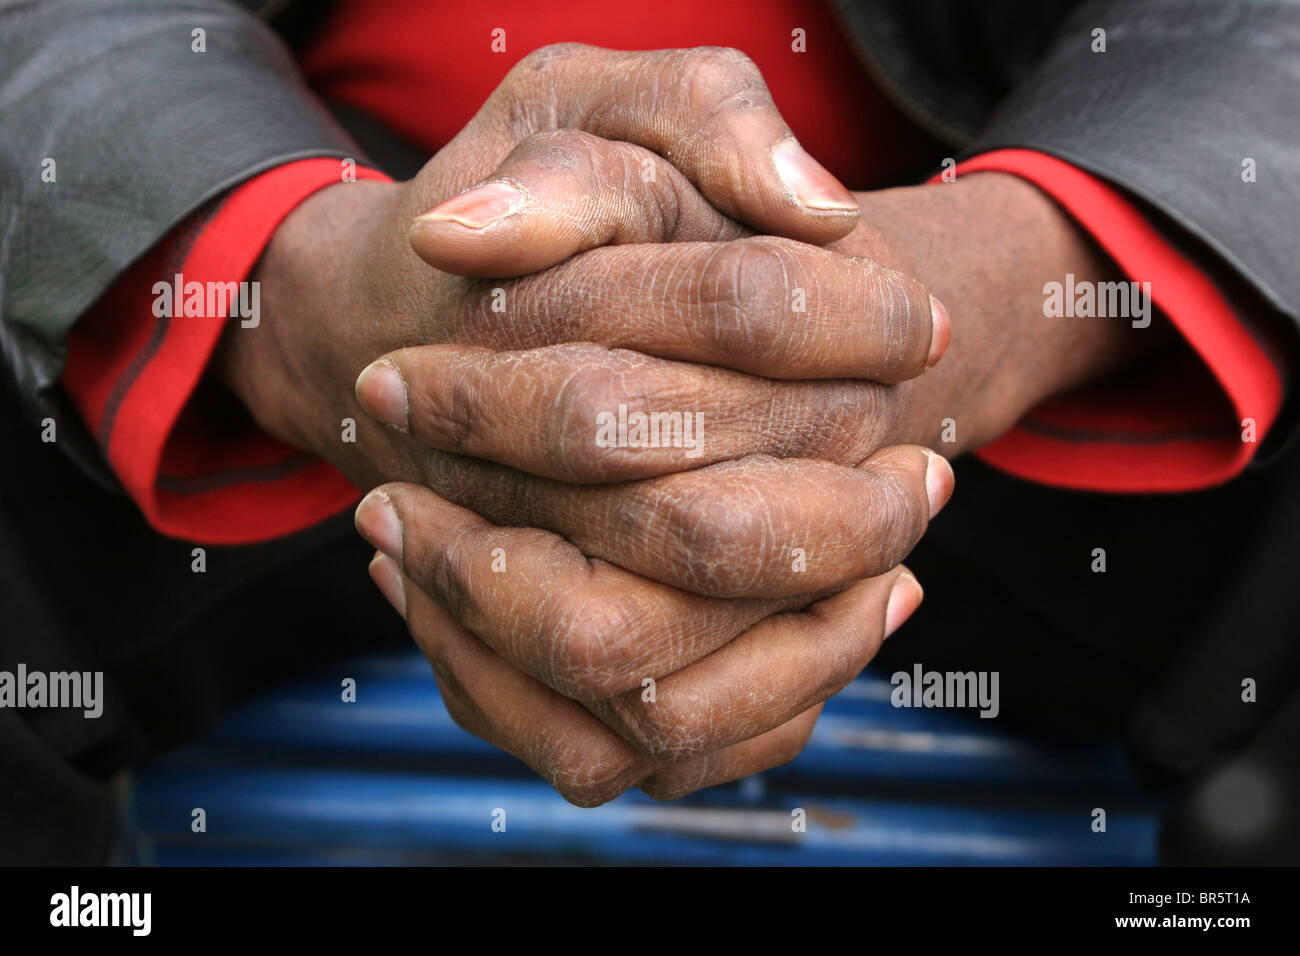 A refugee asylum seeker called Robert who is 42 and from the Democratic Republic of Congo (DRC) clasps his hands. Stock Photo